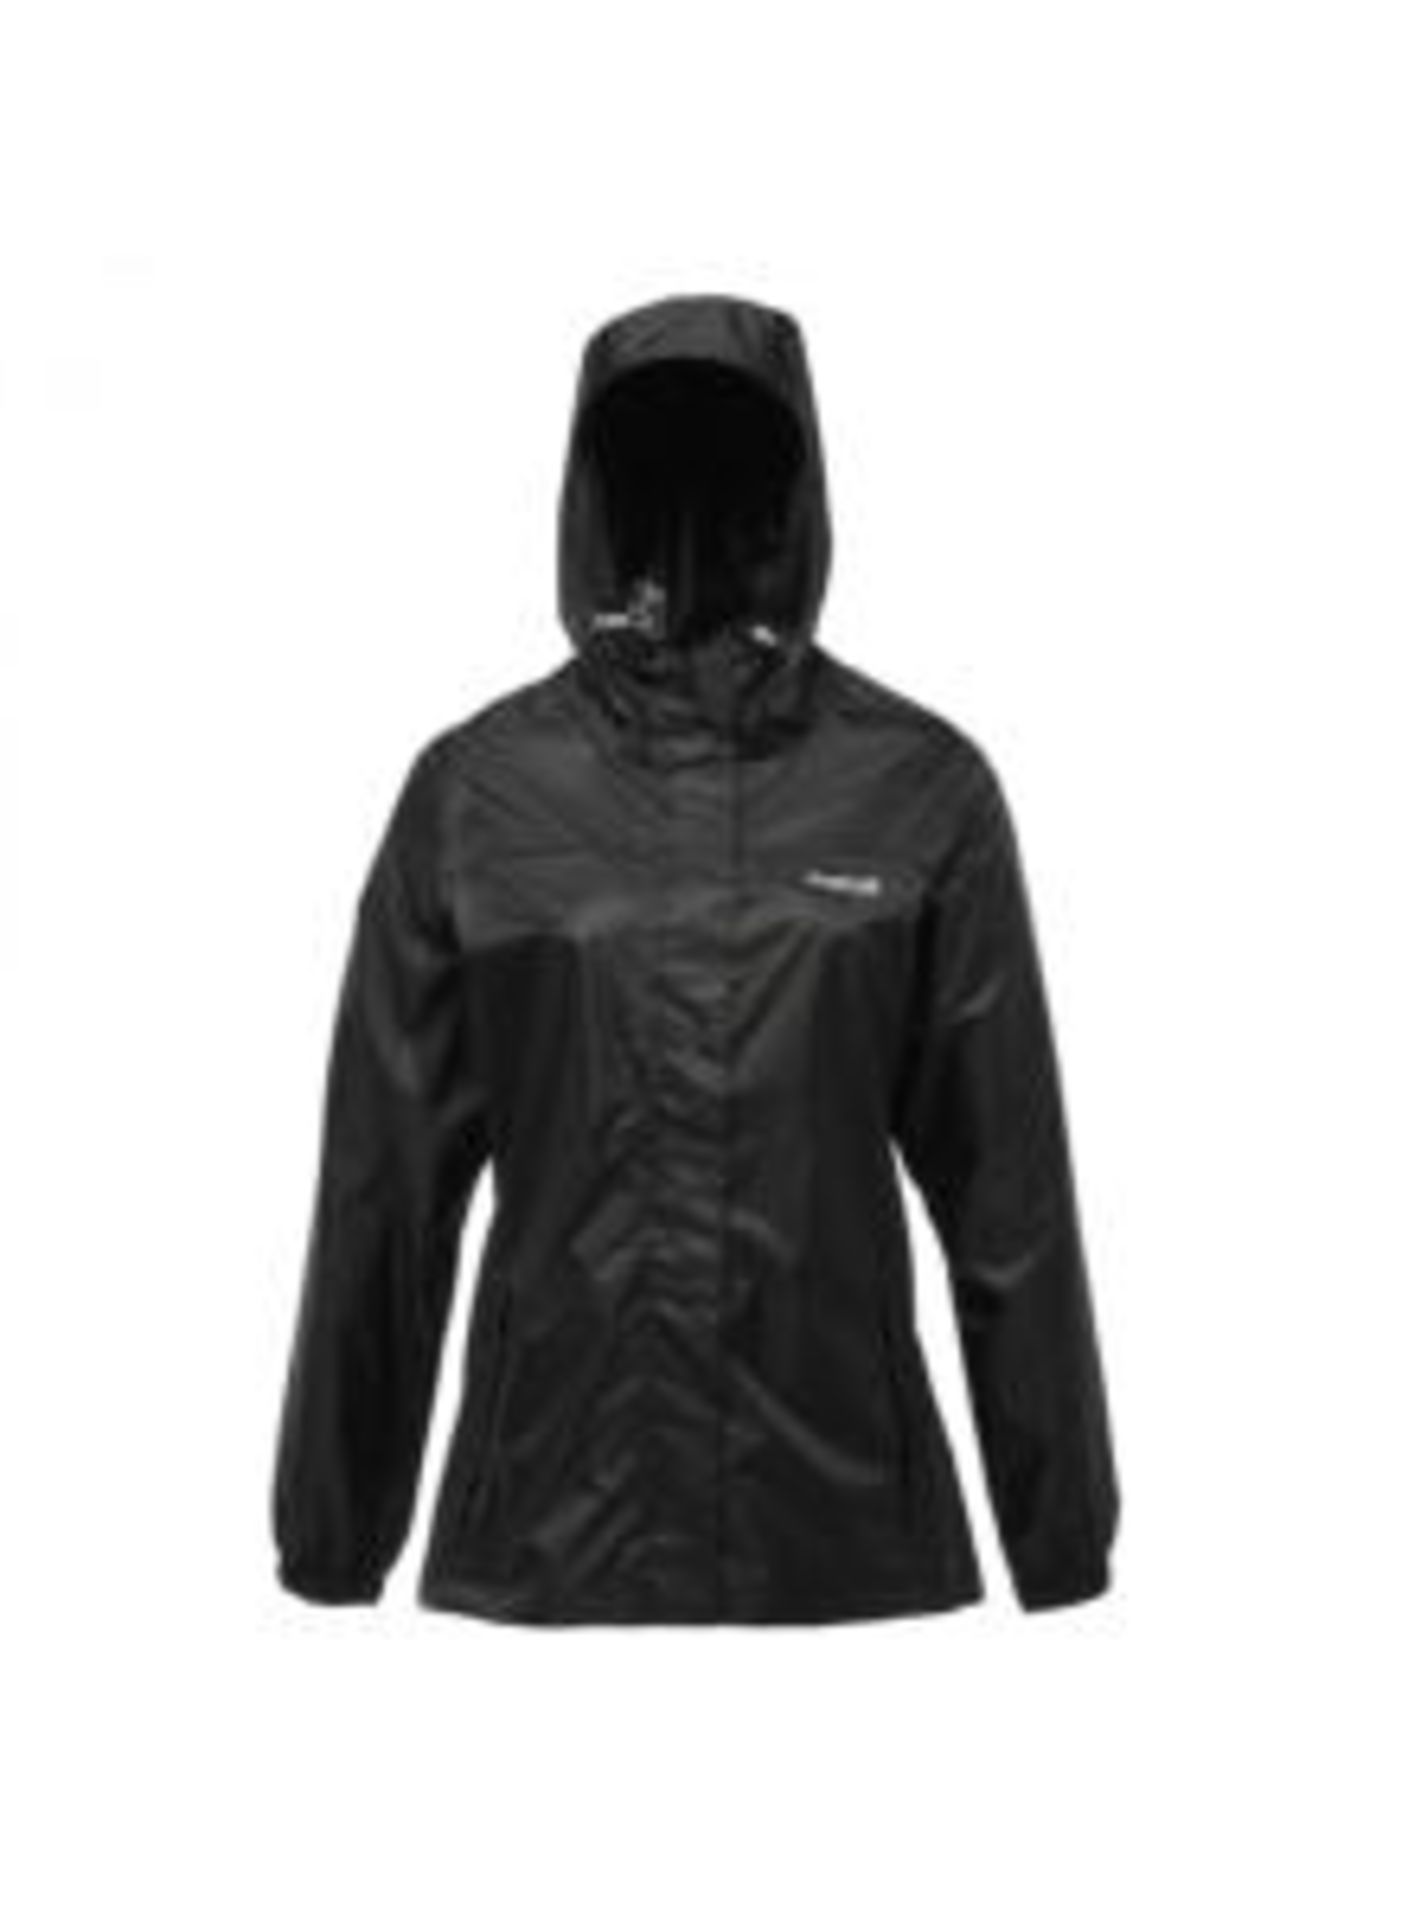 V Waterproof Cagoule In Carry Case Size S - Image 2 of 2